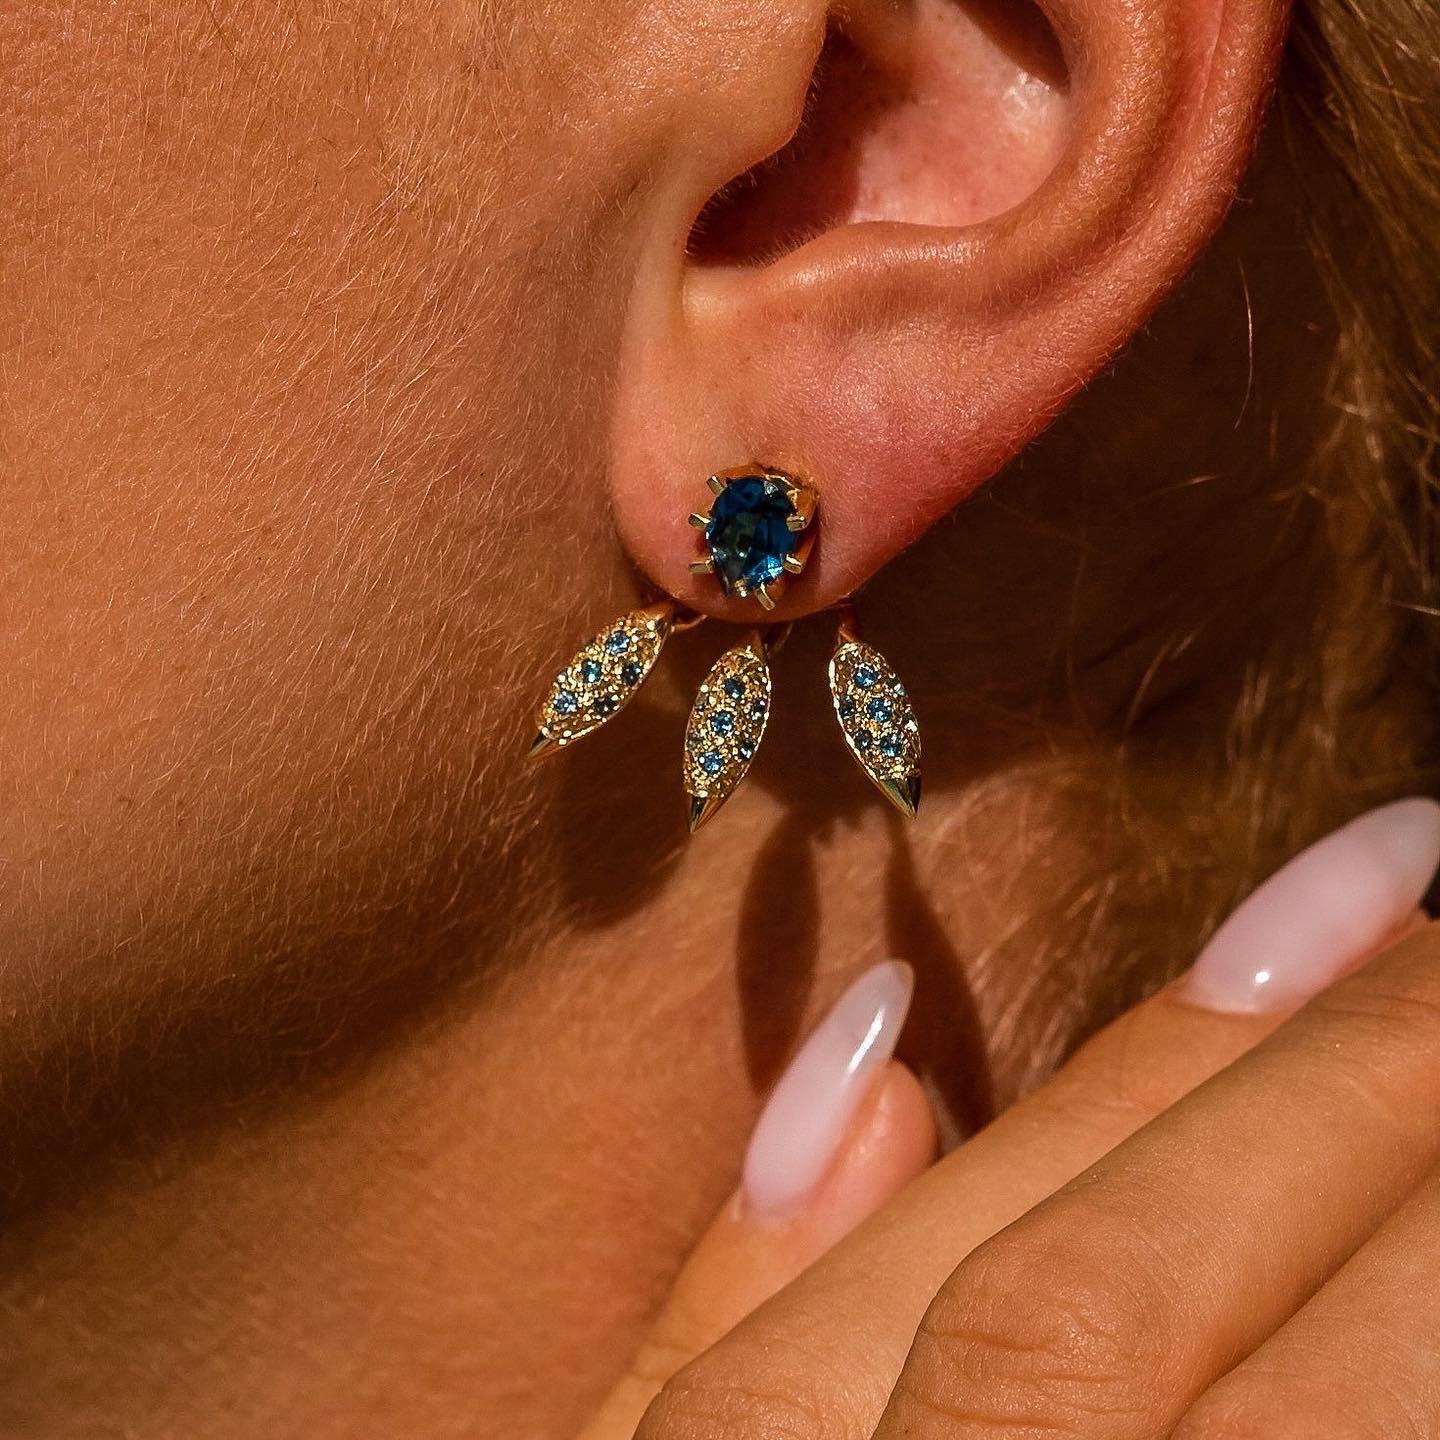 The ‘Grain’, ear jackets are crafted in 18K gold hallmarked in Cyprus. These impressive three part sculptural earrings come in a highly polished finish and feature a pair of separate London Blue Topaz studs totaling 1,0 Cts that can be worn